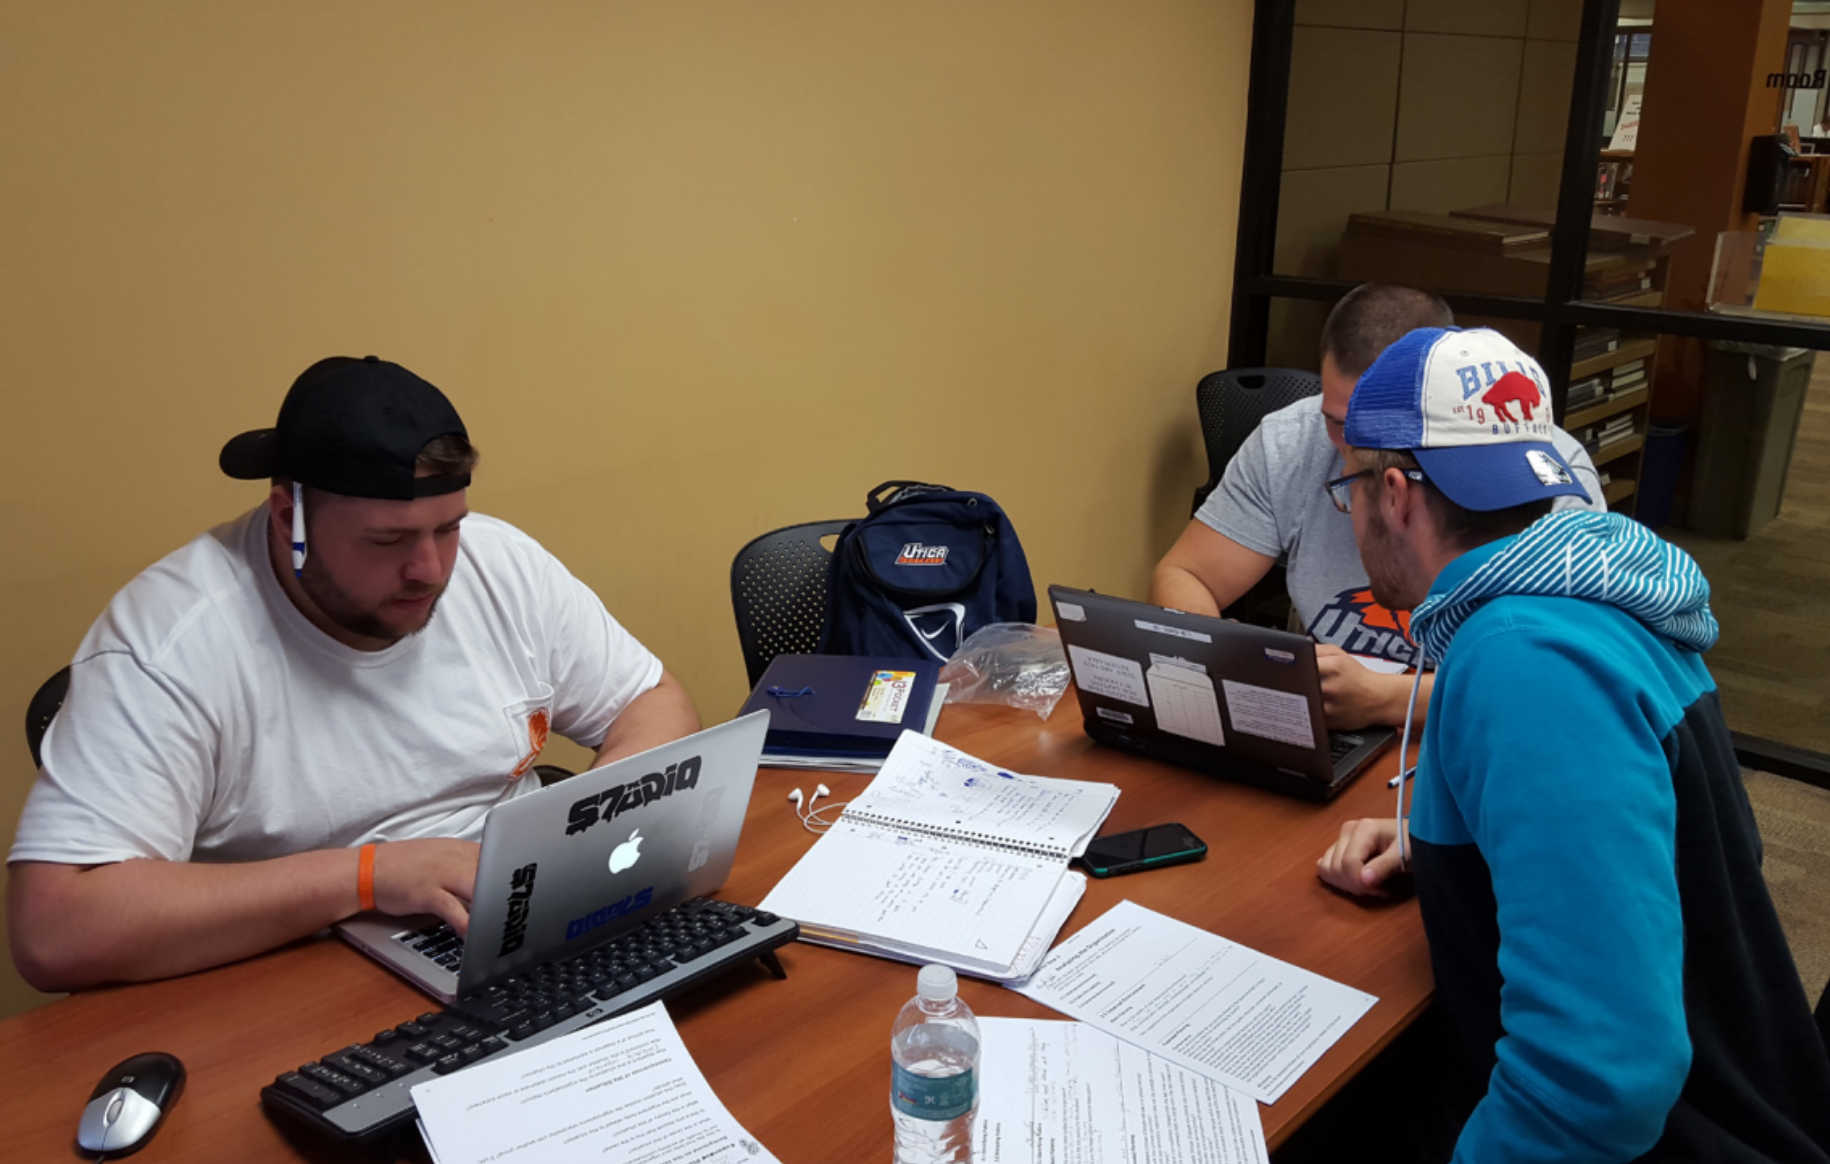 DJ Seitz, Sean Todd, Angelo Romeo gather in the library to work on a research project. Photo by Nicholas Souza